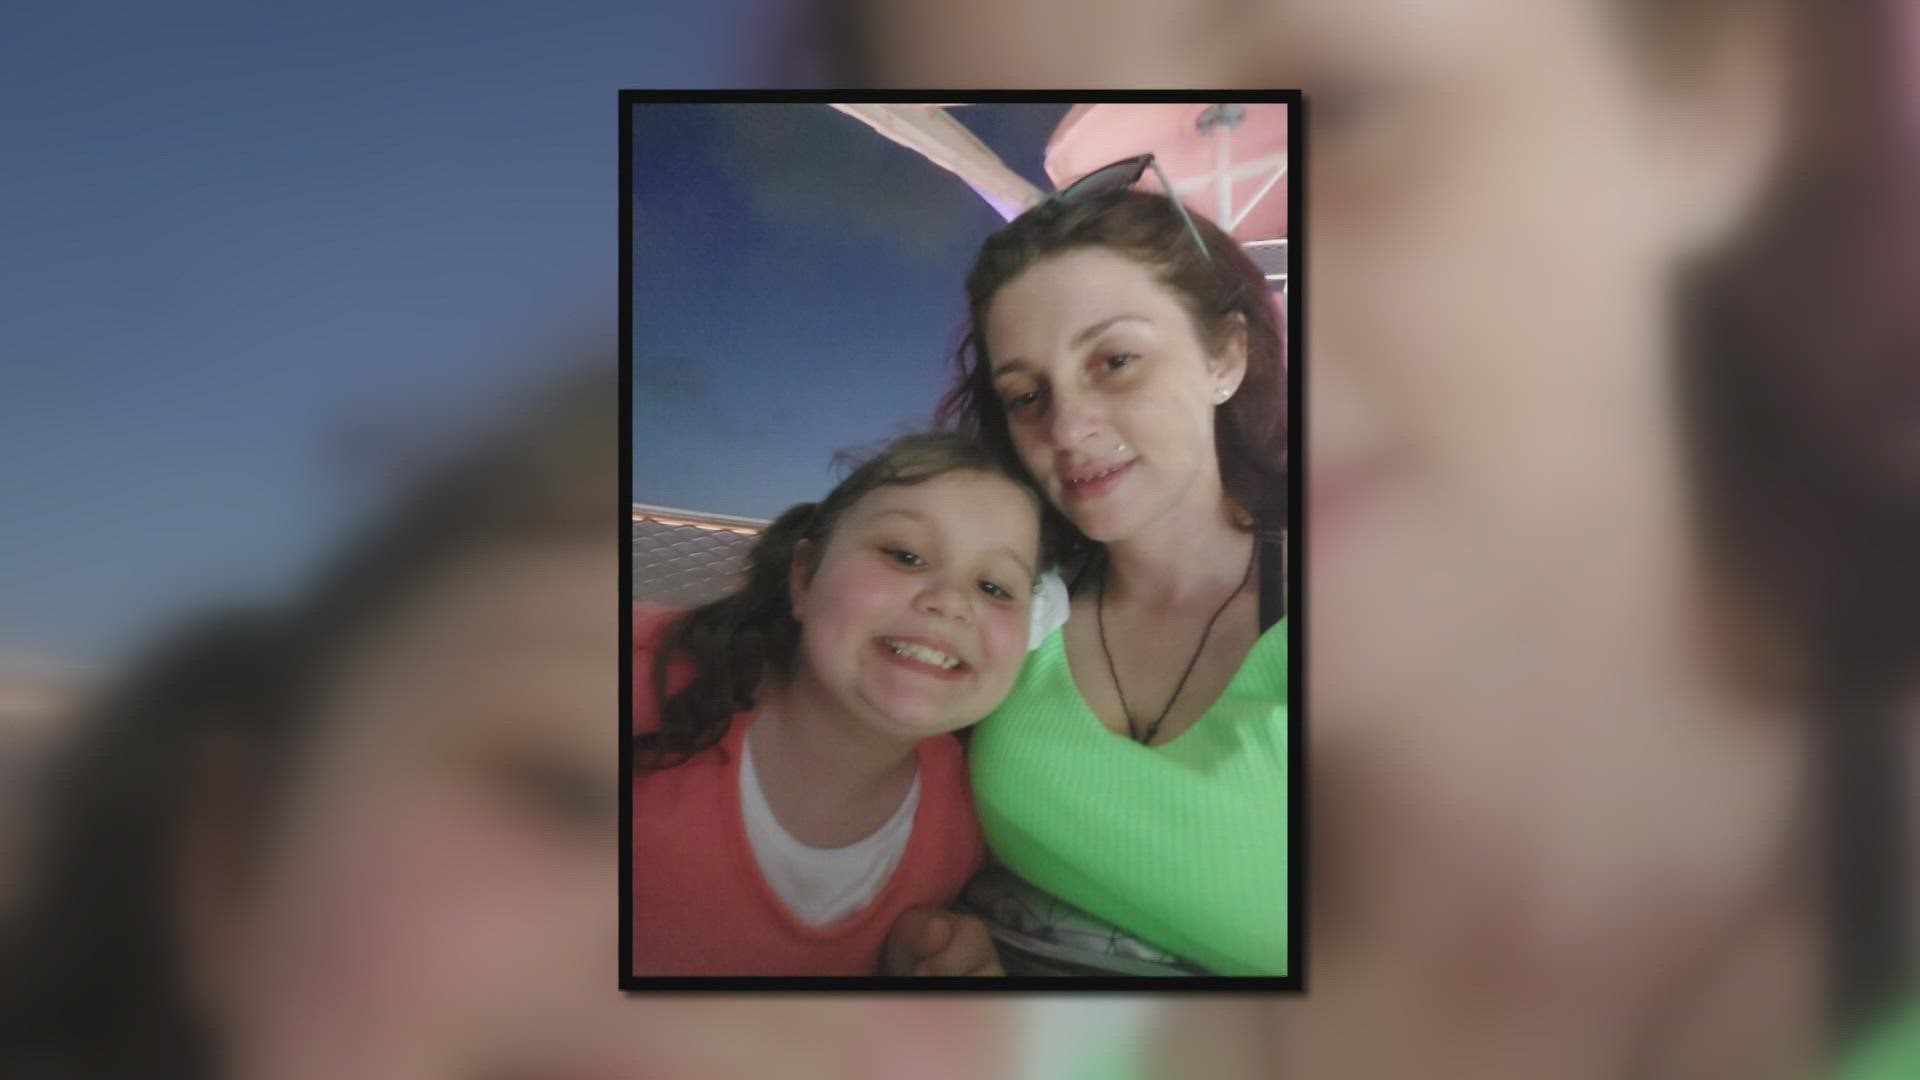 The 9-year-old girl who was hit by a dump truck in Plaquemines Parish will have a long road to recovery - more than a year - but she got some good news Thursday.